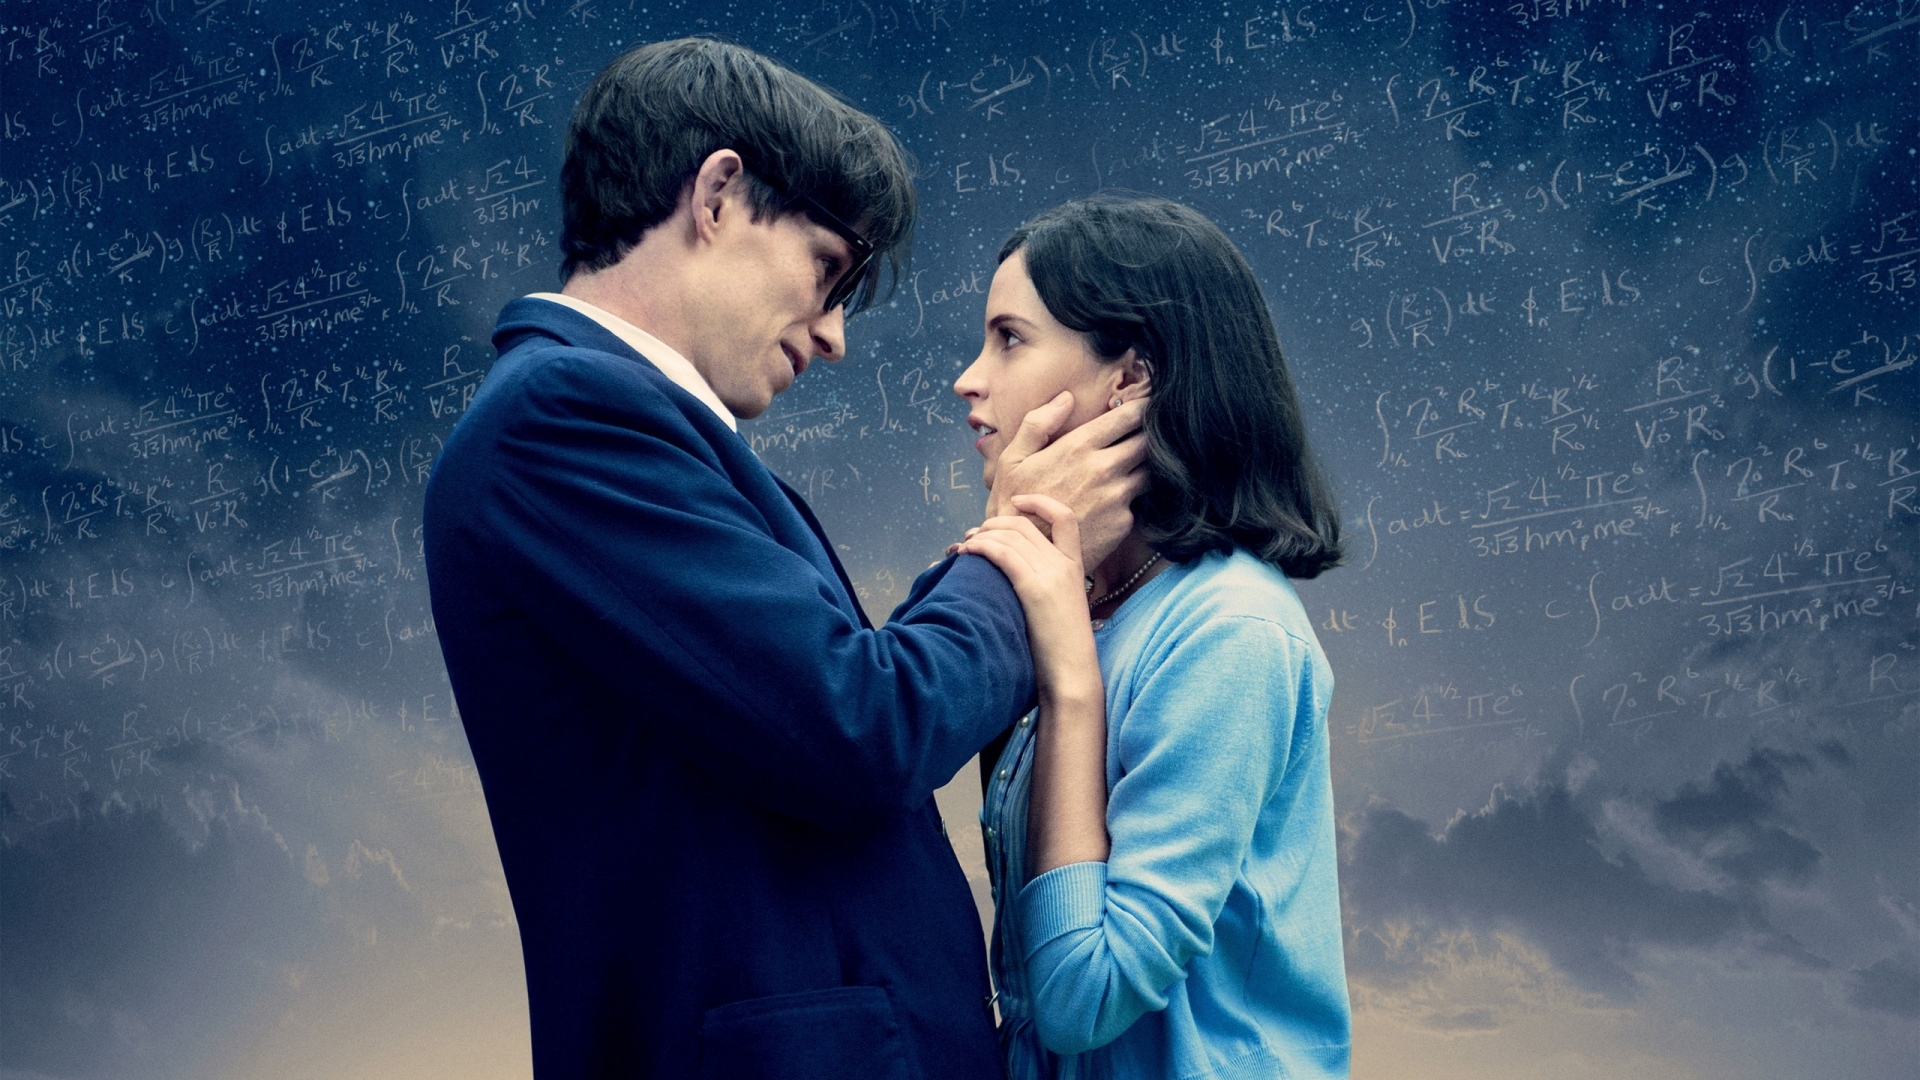 The Theory of Everything for 1920 x 1080 HDTV 1080p resolution